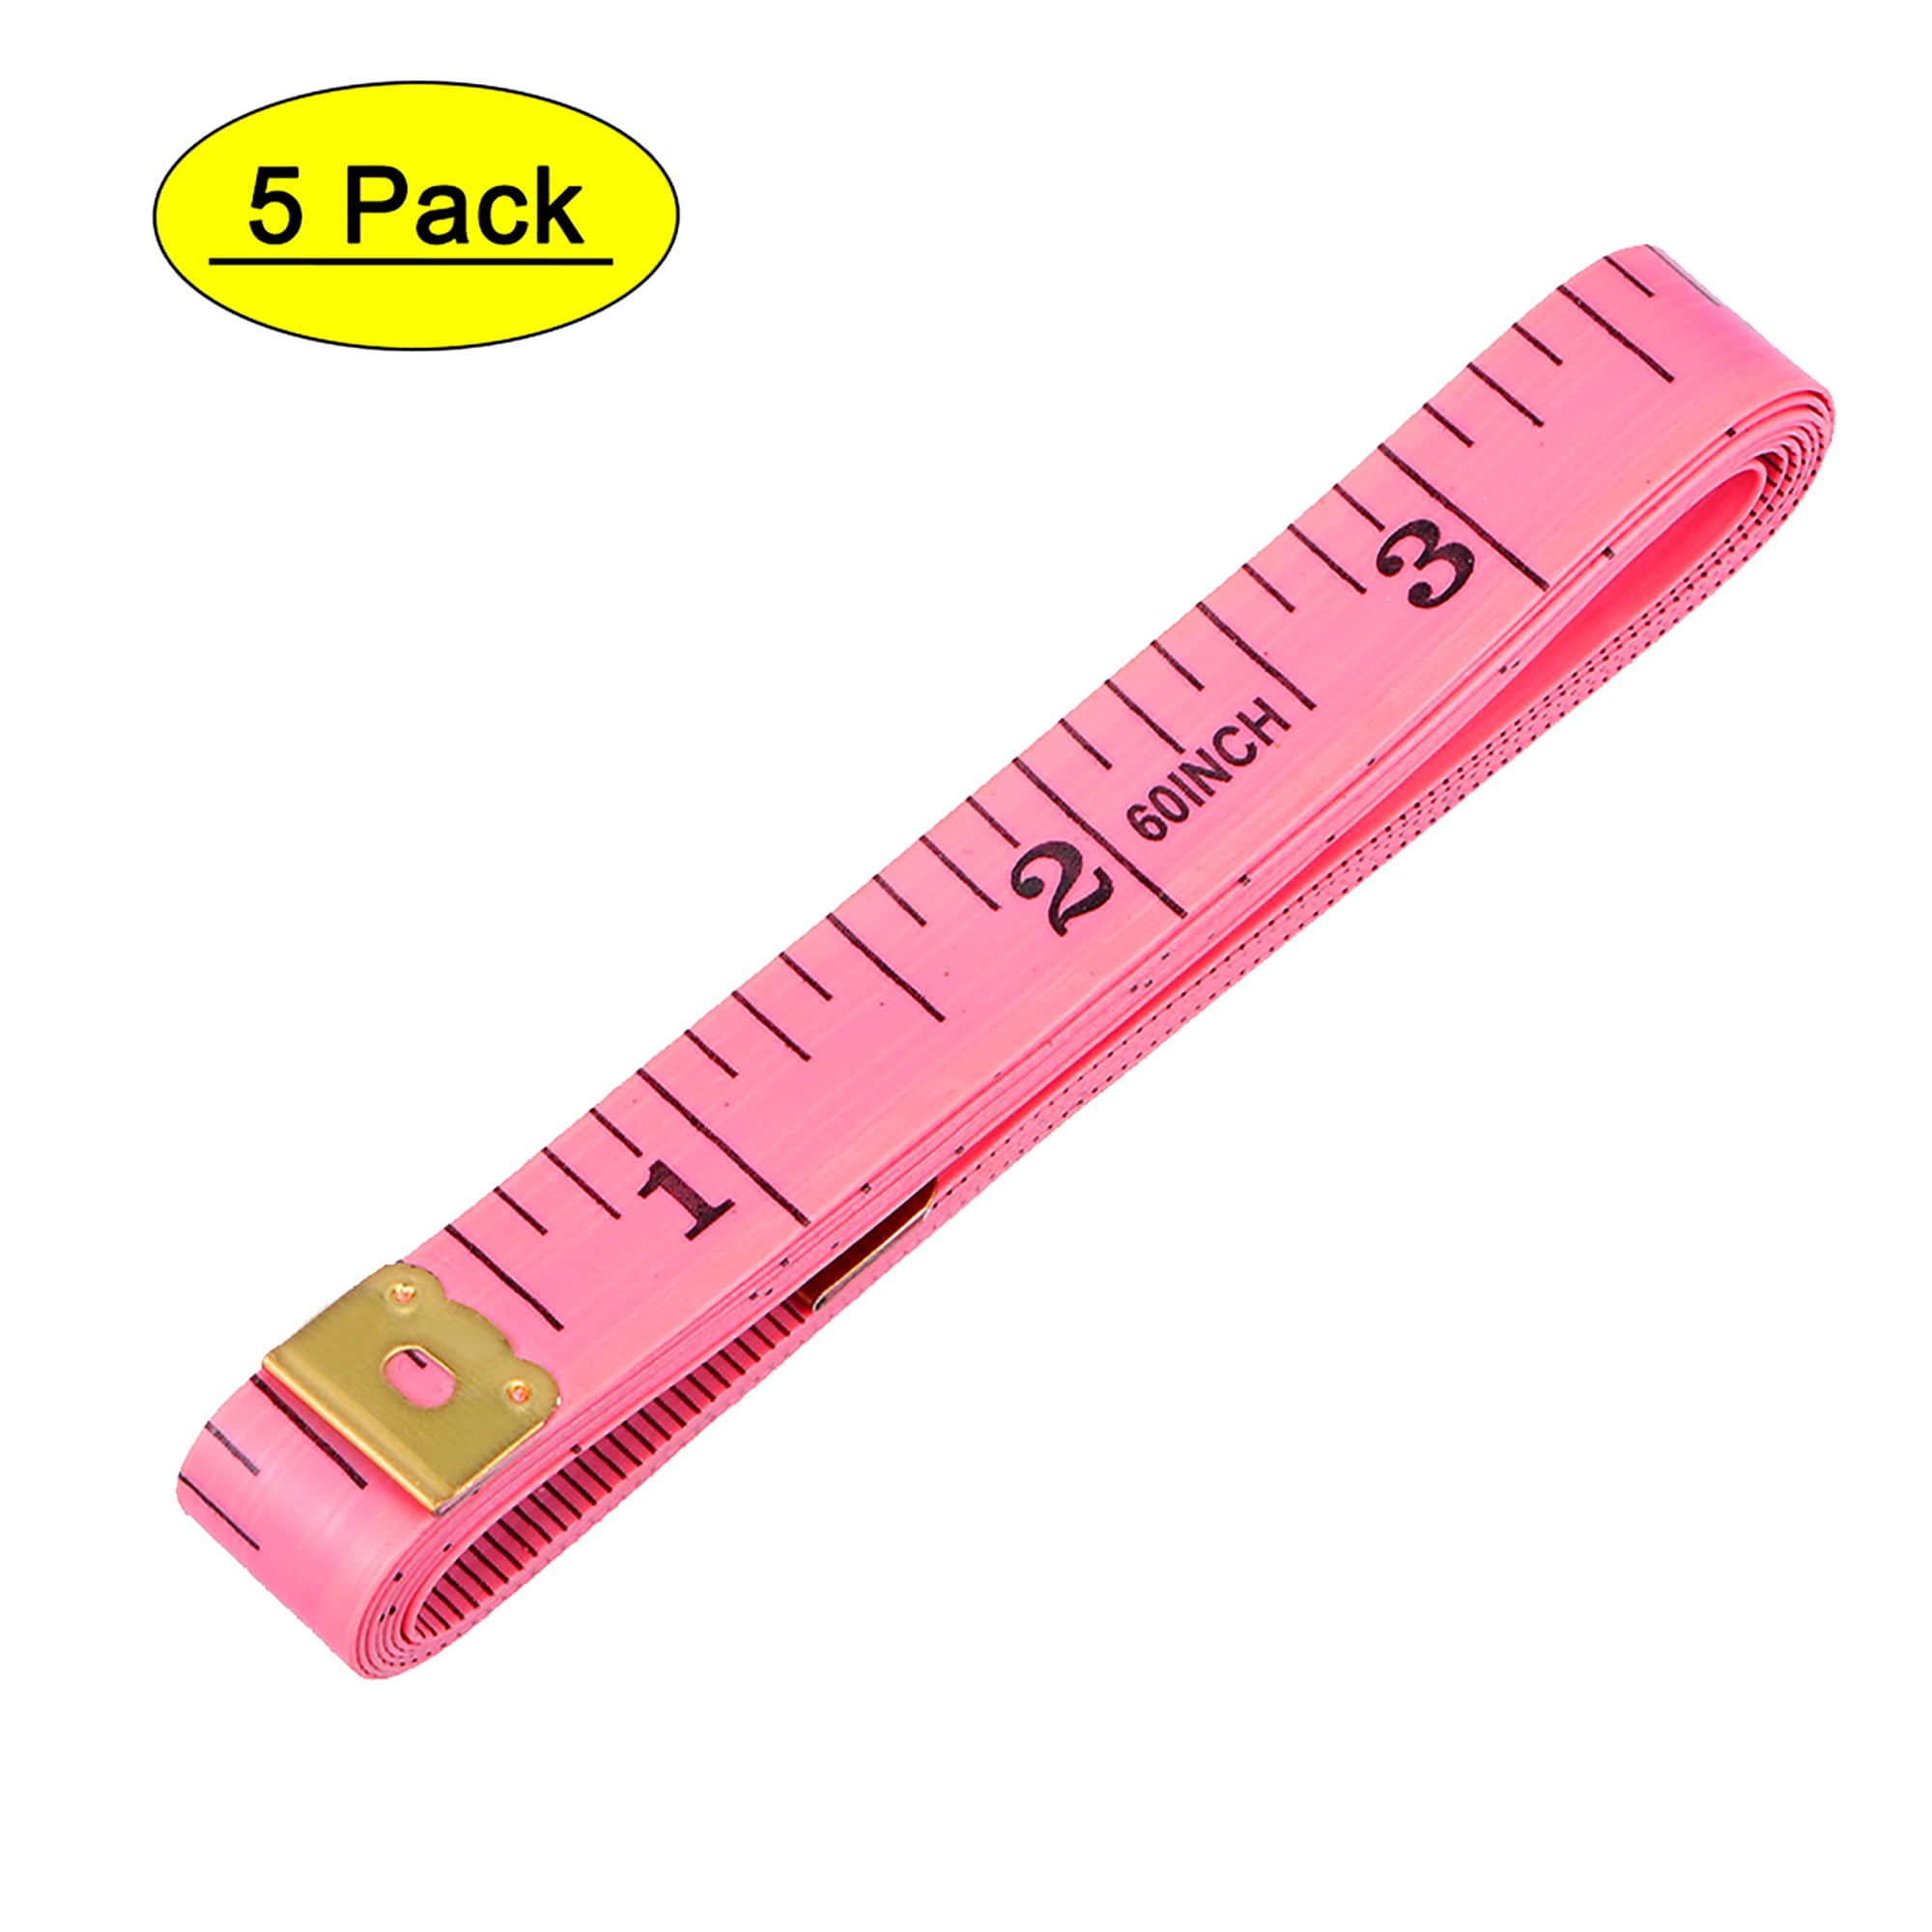 Body Fabric Tape Measure for Sewing Fabric Pink FBGood Body Tape Measure 